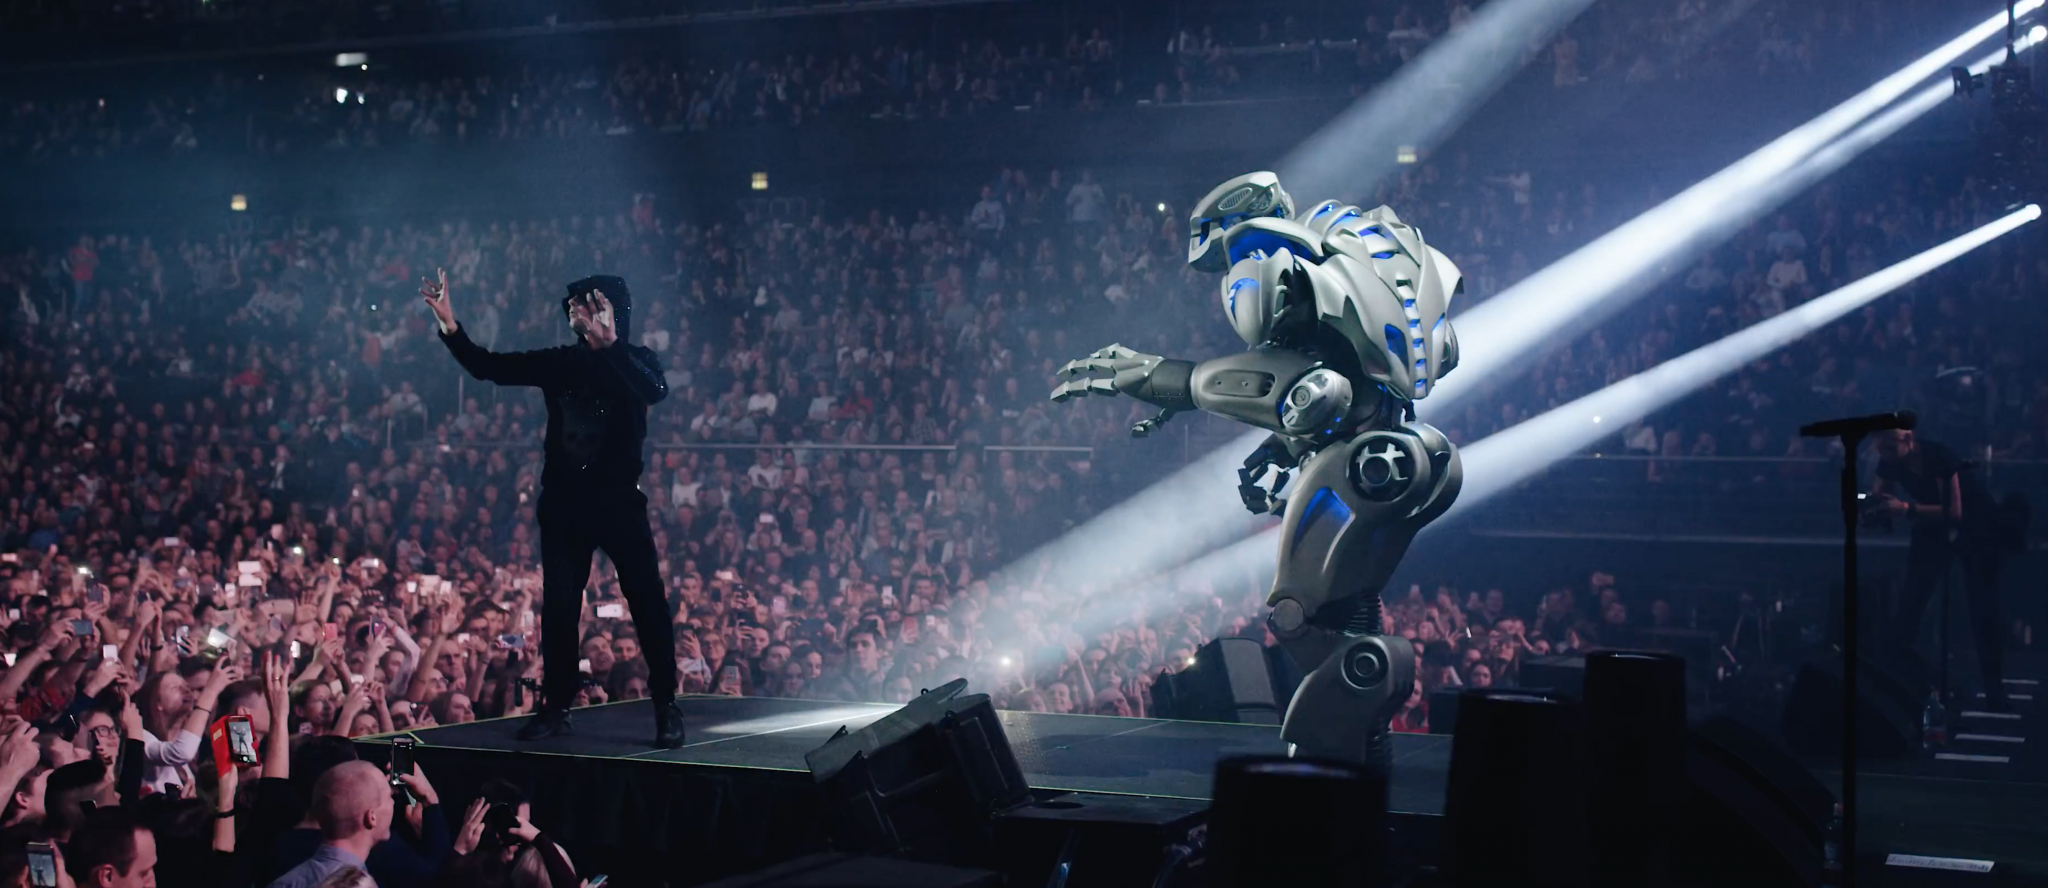 Titan the Robot on stage with Sea in Kaunas, Lithuania.